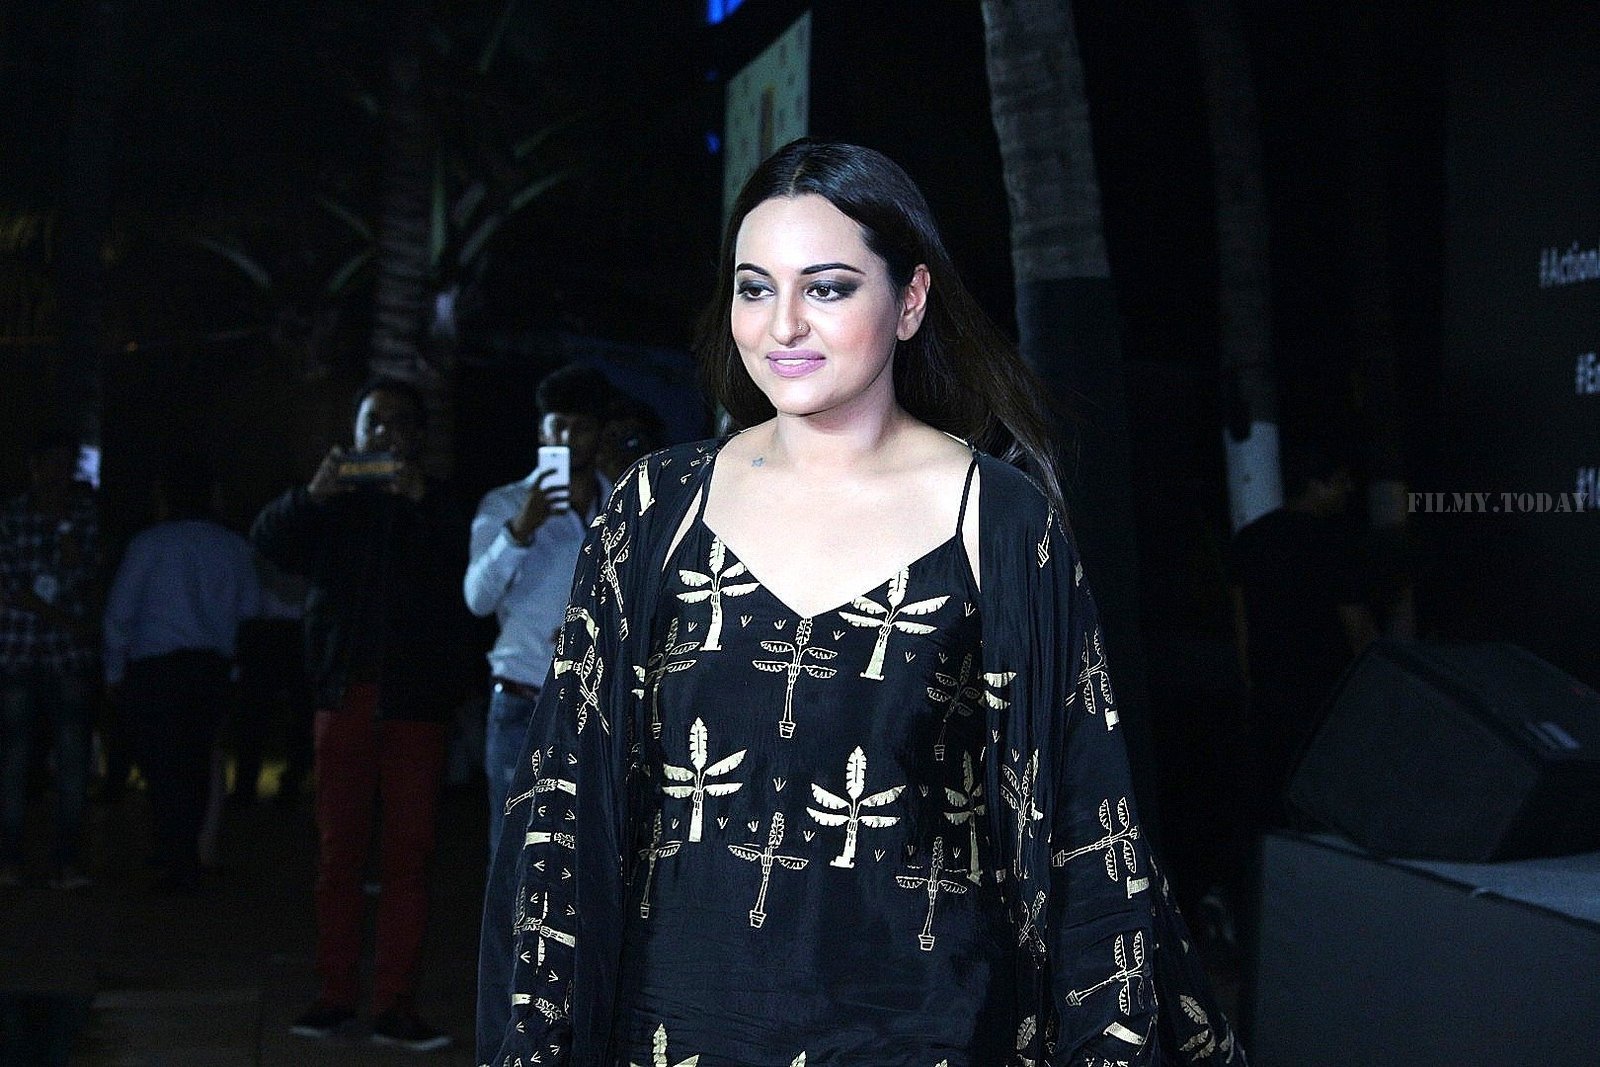 Sonakshi Sinha - Photos: The Awards Night For Its Short Film Festival Based On Women's Safety & Empowerment | Picture 1549859